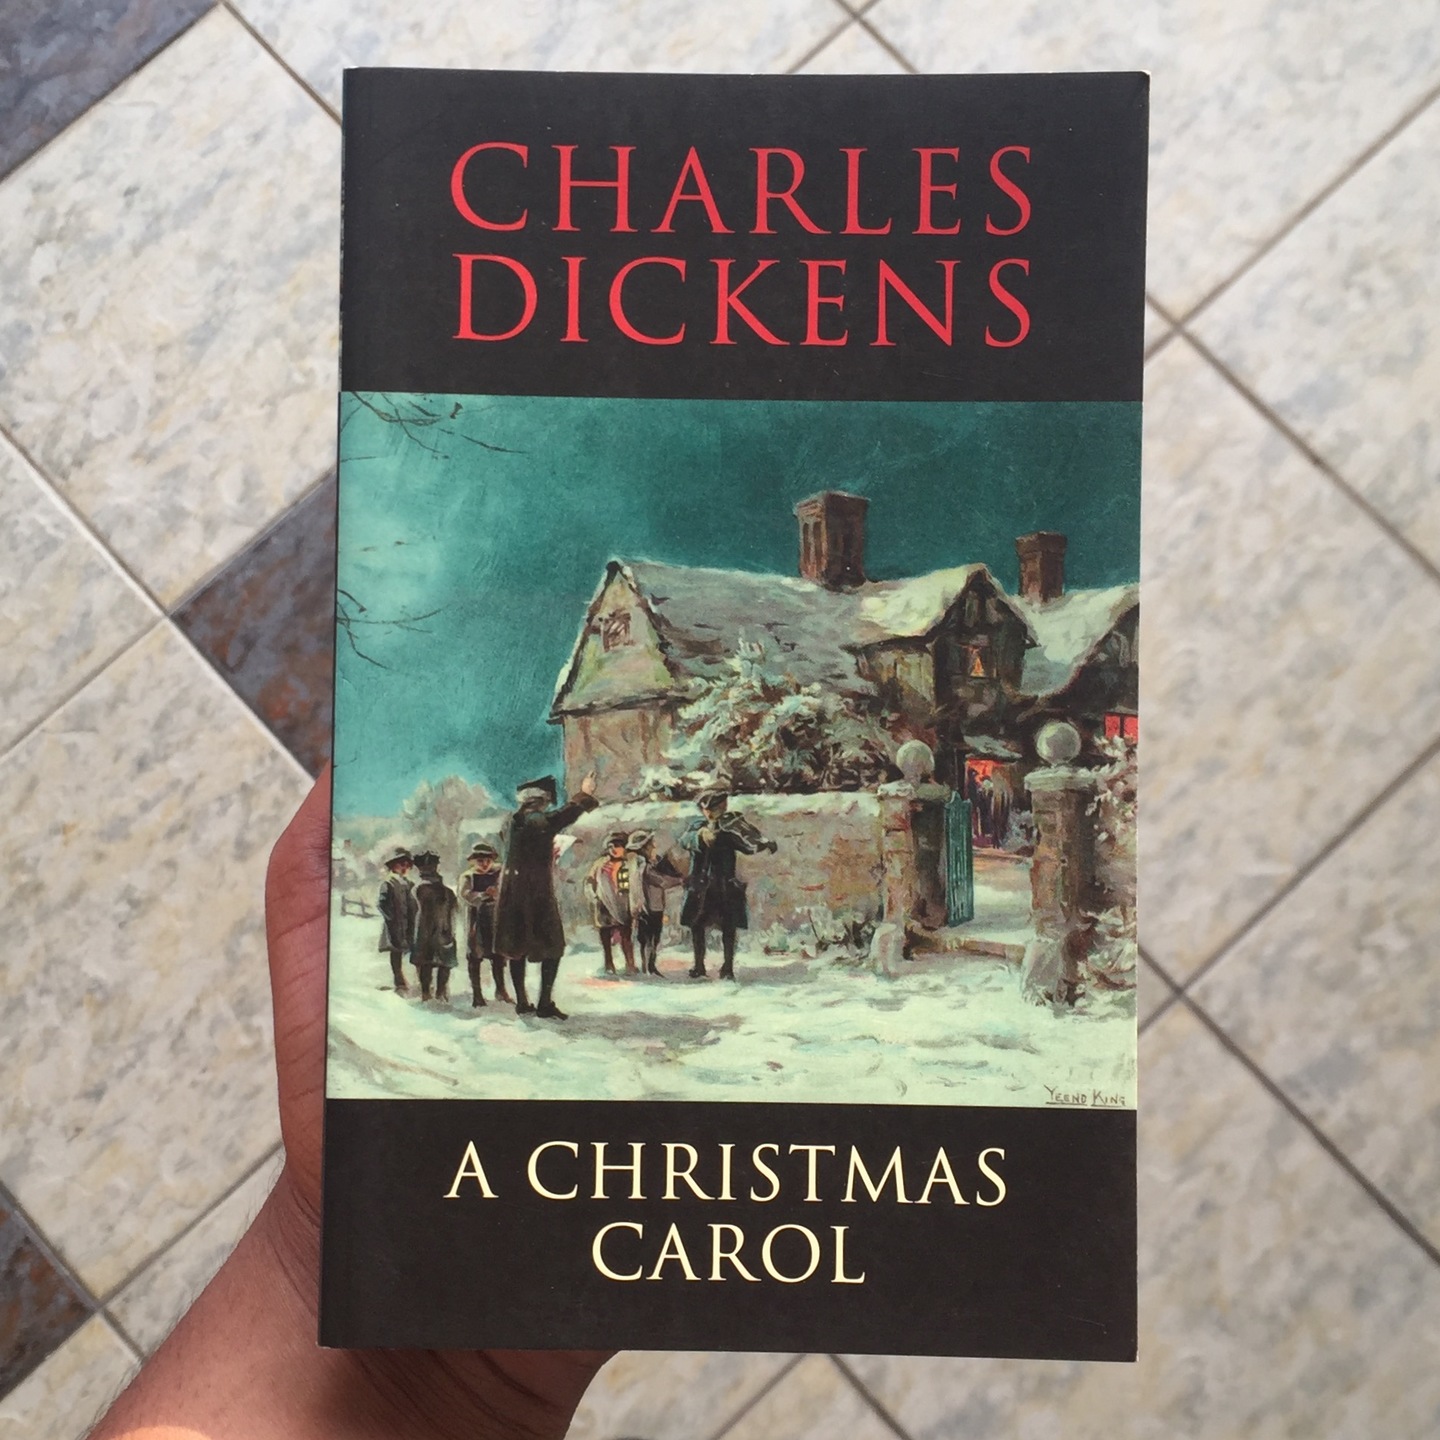 A Christmas Carol by Charles Dickens [Paperback]